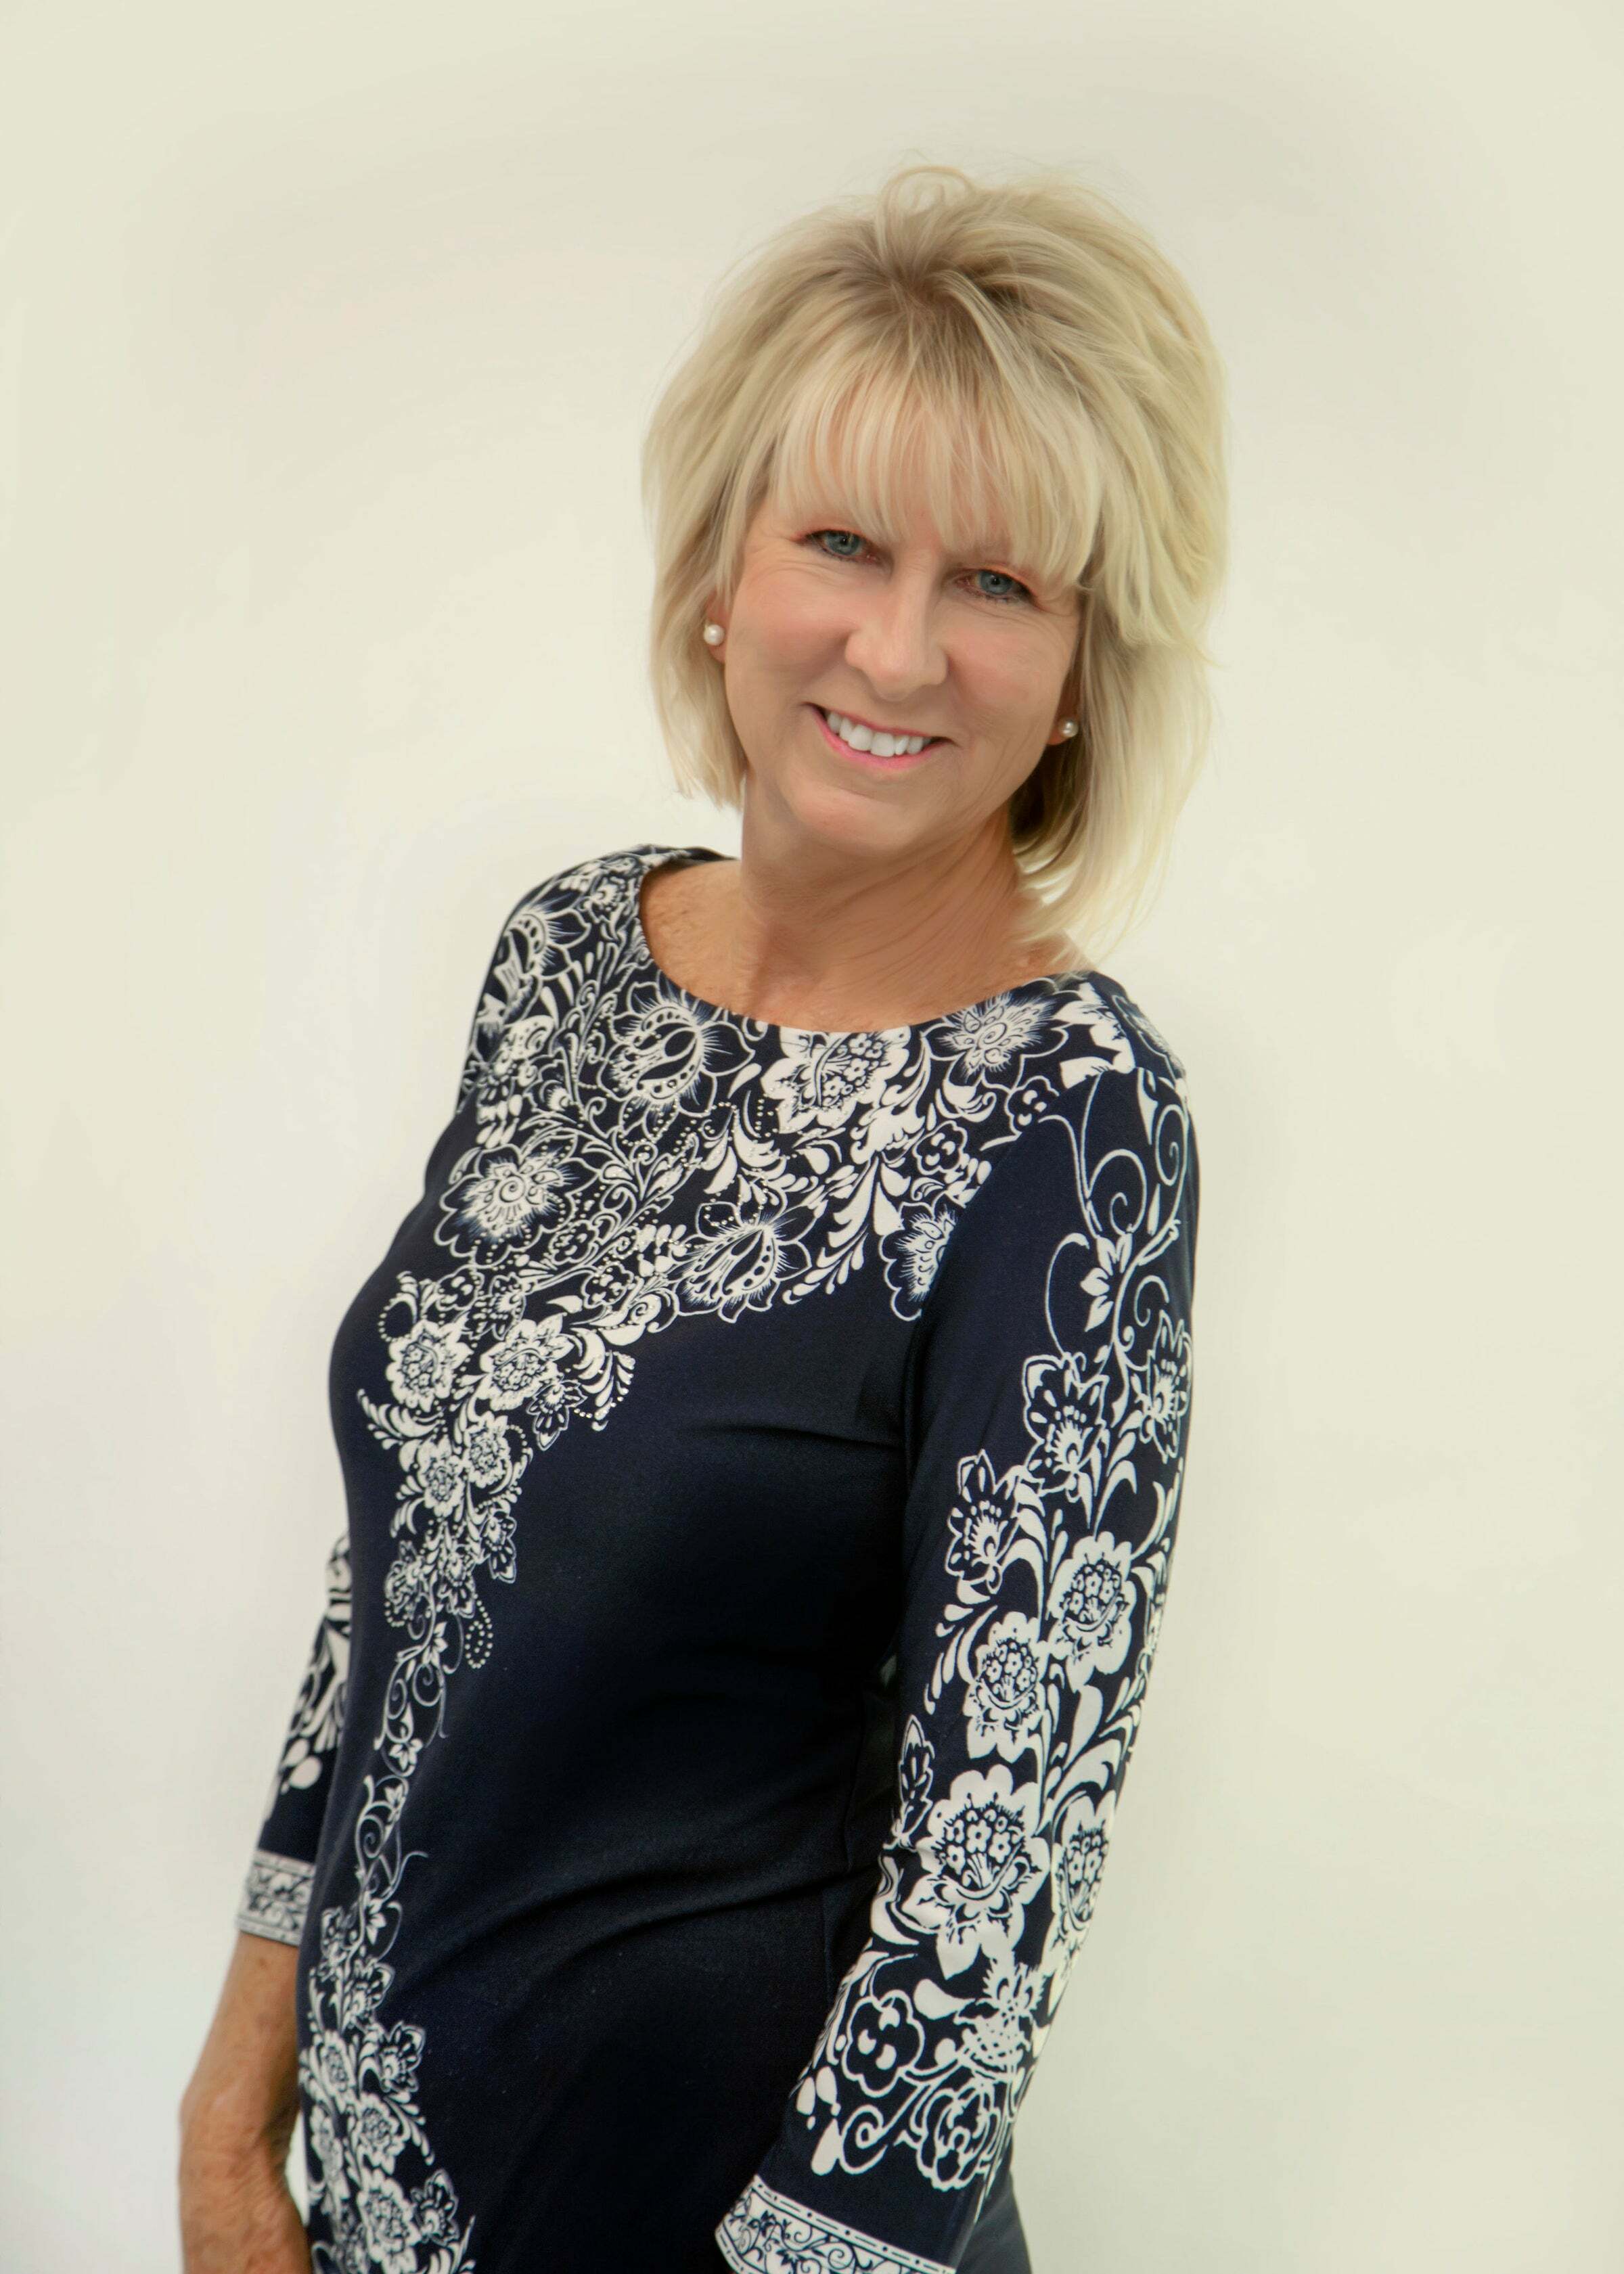 Lori Cubbedge, Real Estate Salesperson in Titusville, MUTTER REALTY ERA POWERED